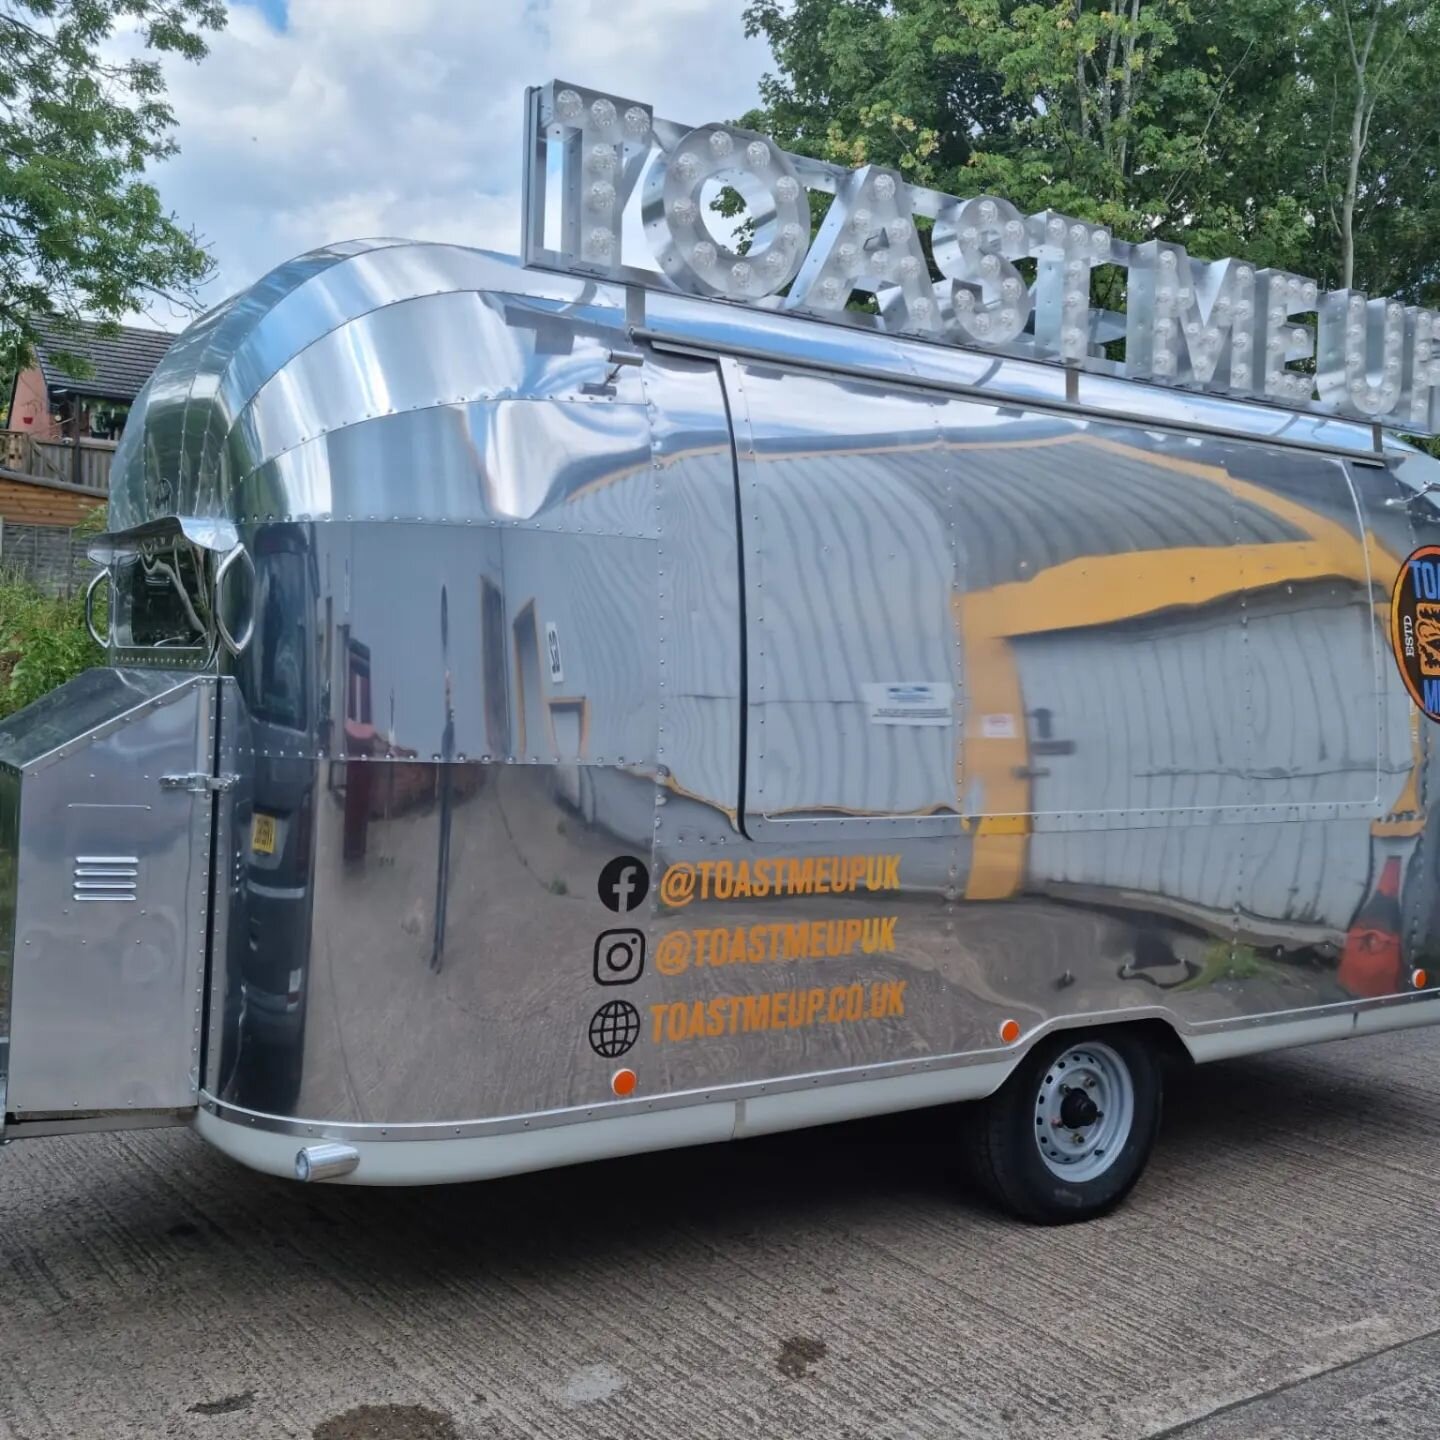 @toastmeupuk All ready to go earn it's keep🦾 Best of luck guys. 

#catering #vintagecatering #food #airstream #foodtruck #foodtrailer #streetfood #handmadeuk